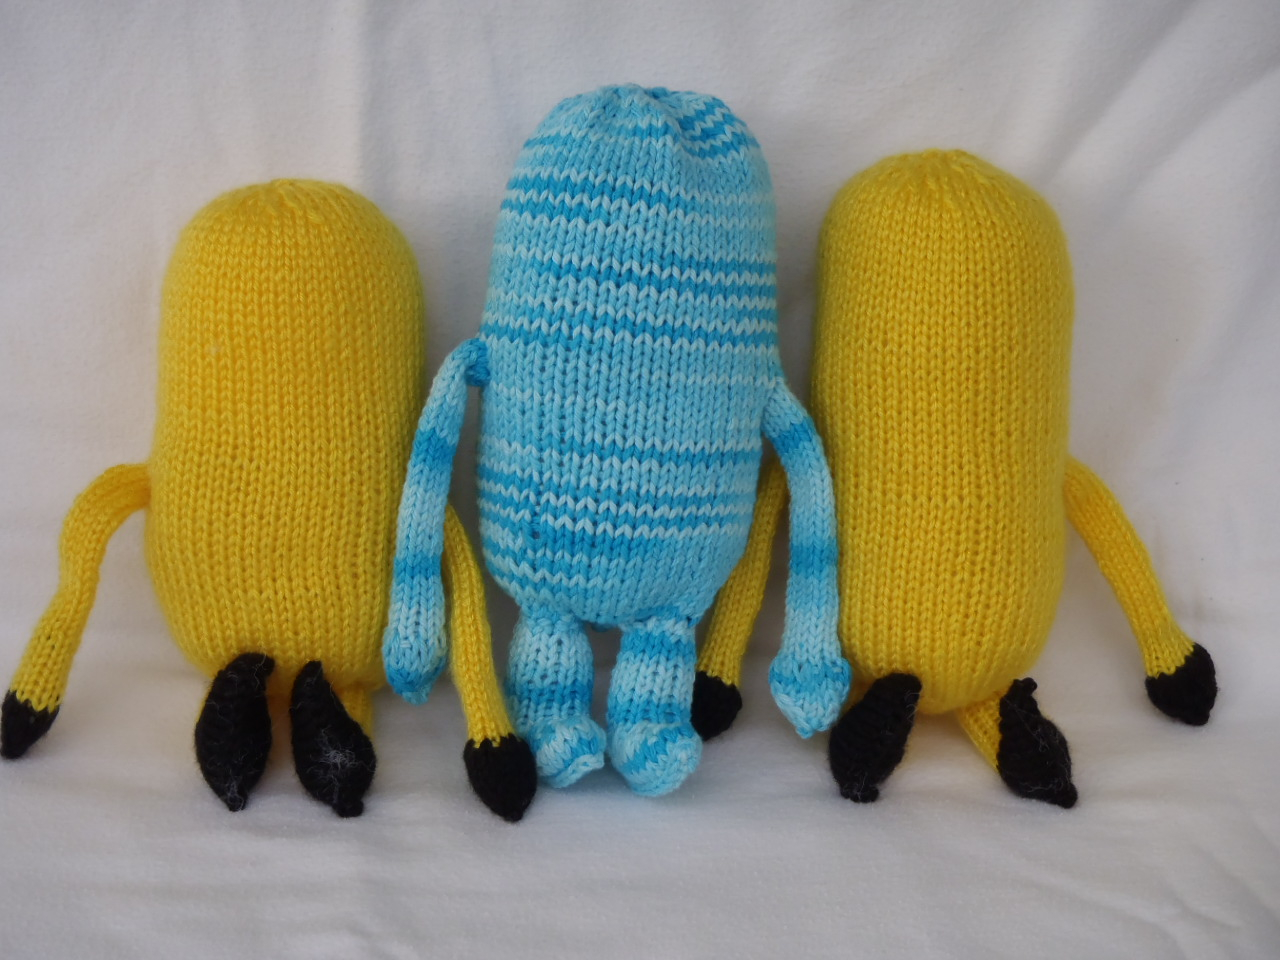 Knitting Patterns For Minions Stanas Critters Etc Knitting Pattern For Minions Part 1